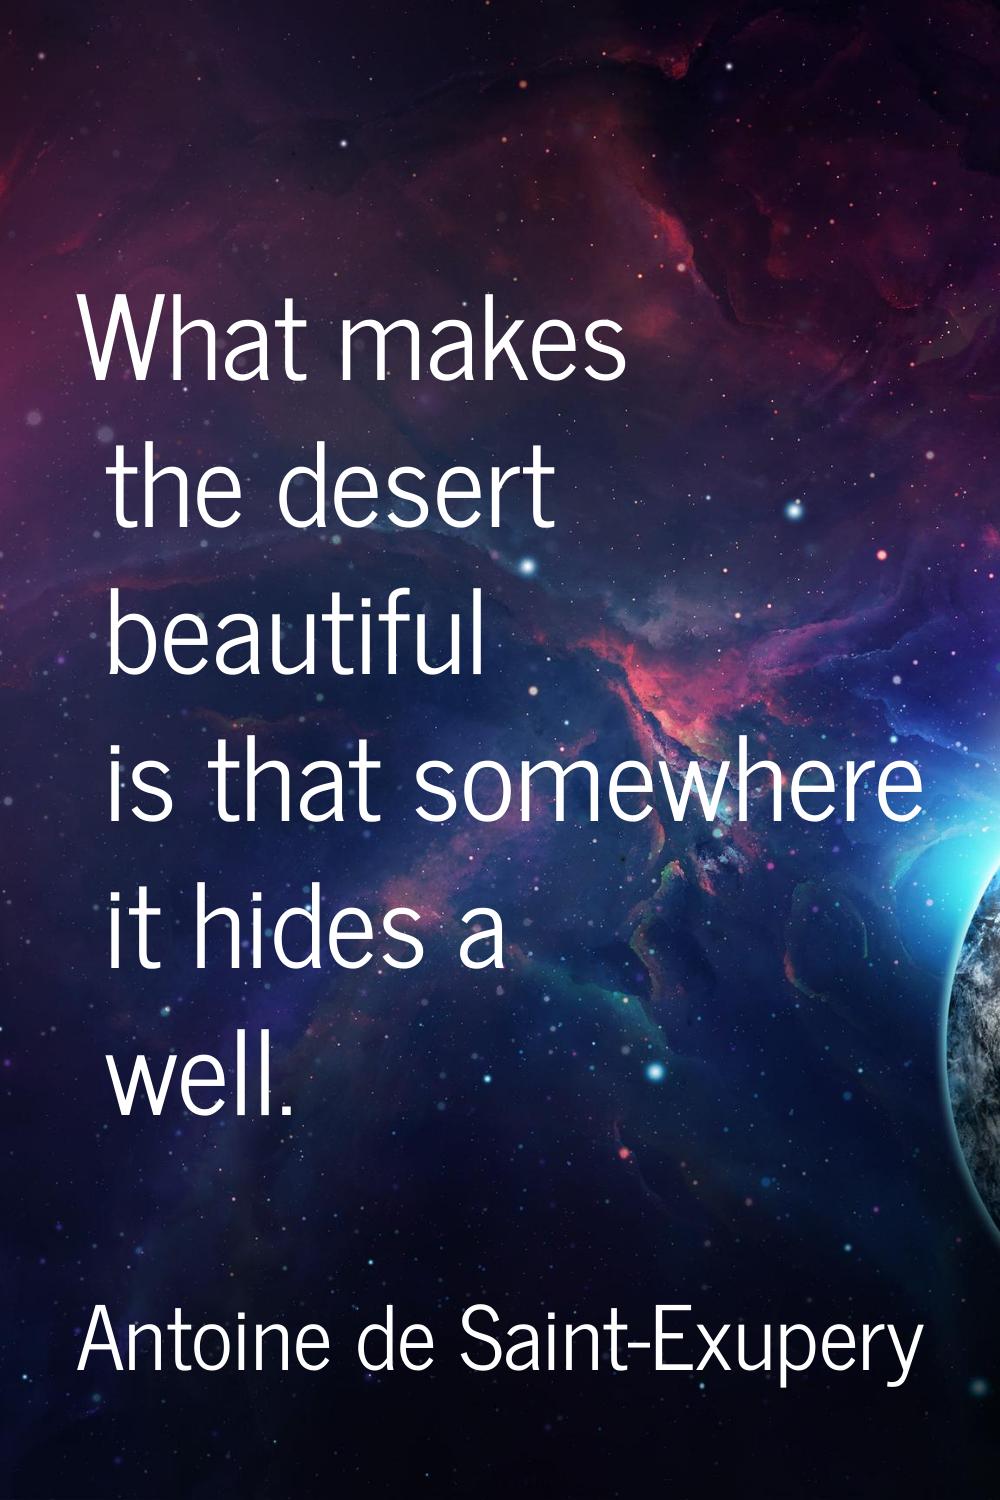 What makes the desert beautiful is that somewhere it hides a well.